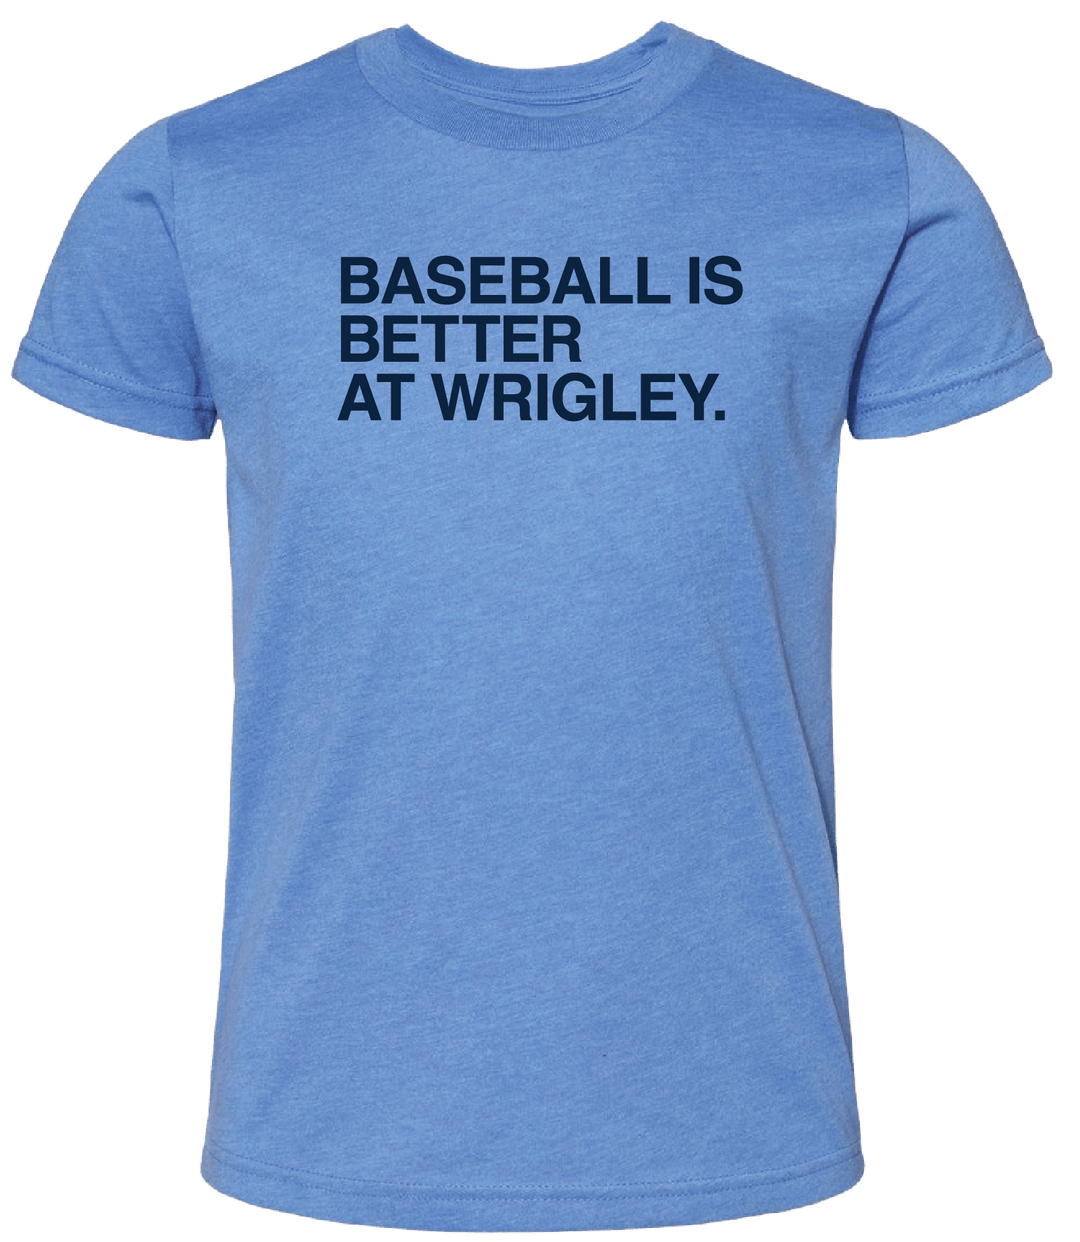 BASEBALL IS BETTER AT WRIGLEY. (YOUTH) - OBVIOUS SHIRTS